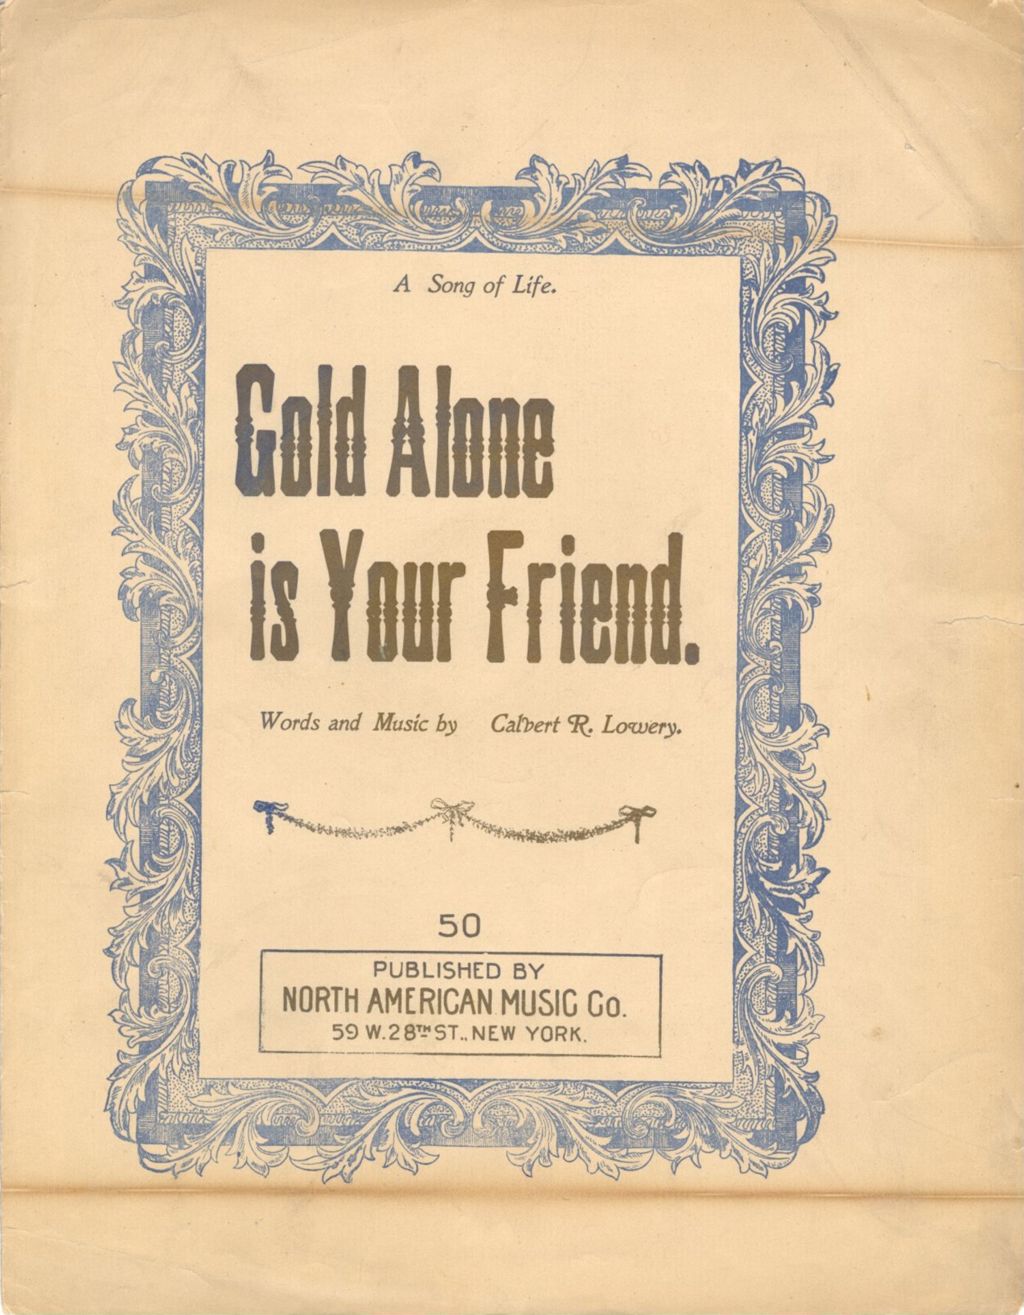 Miniature of Gold Alone is Your Friend